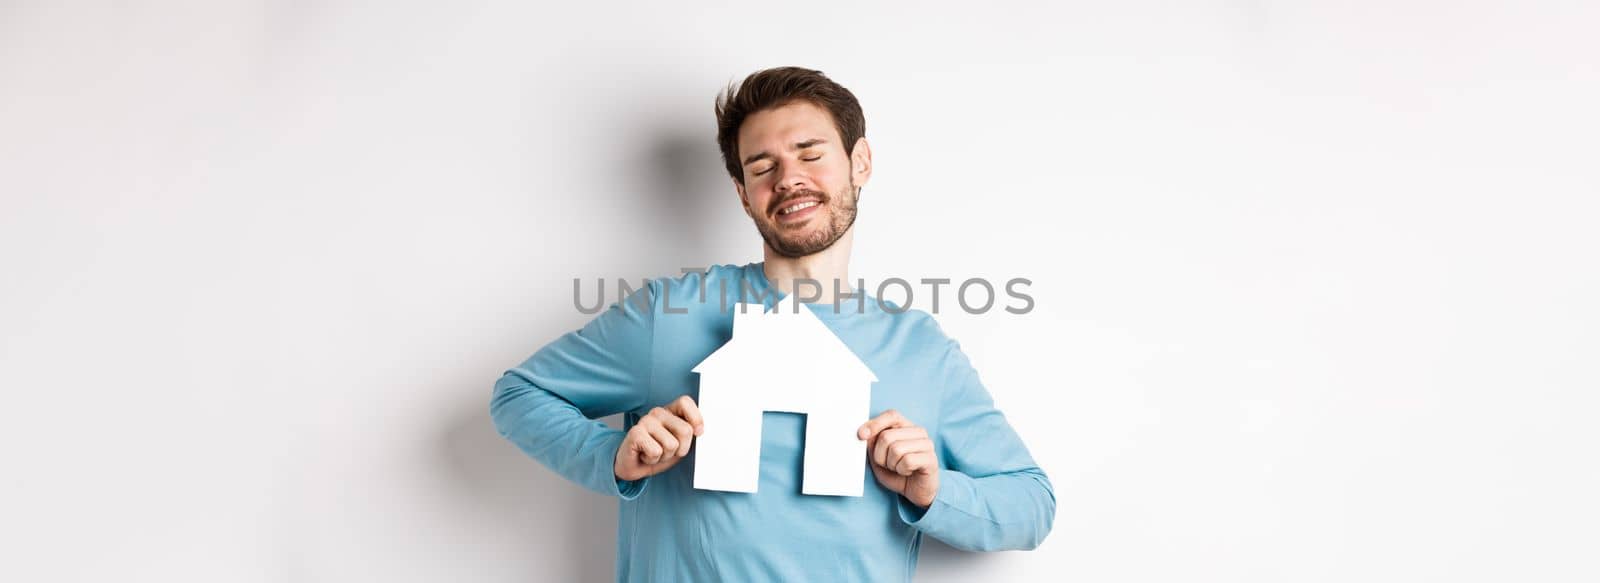 Real estate and insurance concept. Dreamy young man smiling with closed eyes, showing paper house cutout, wishing to buy home, standing over white background.